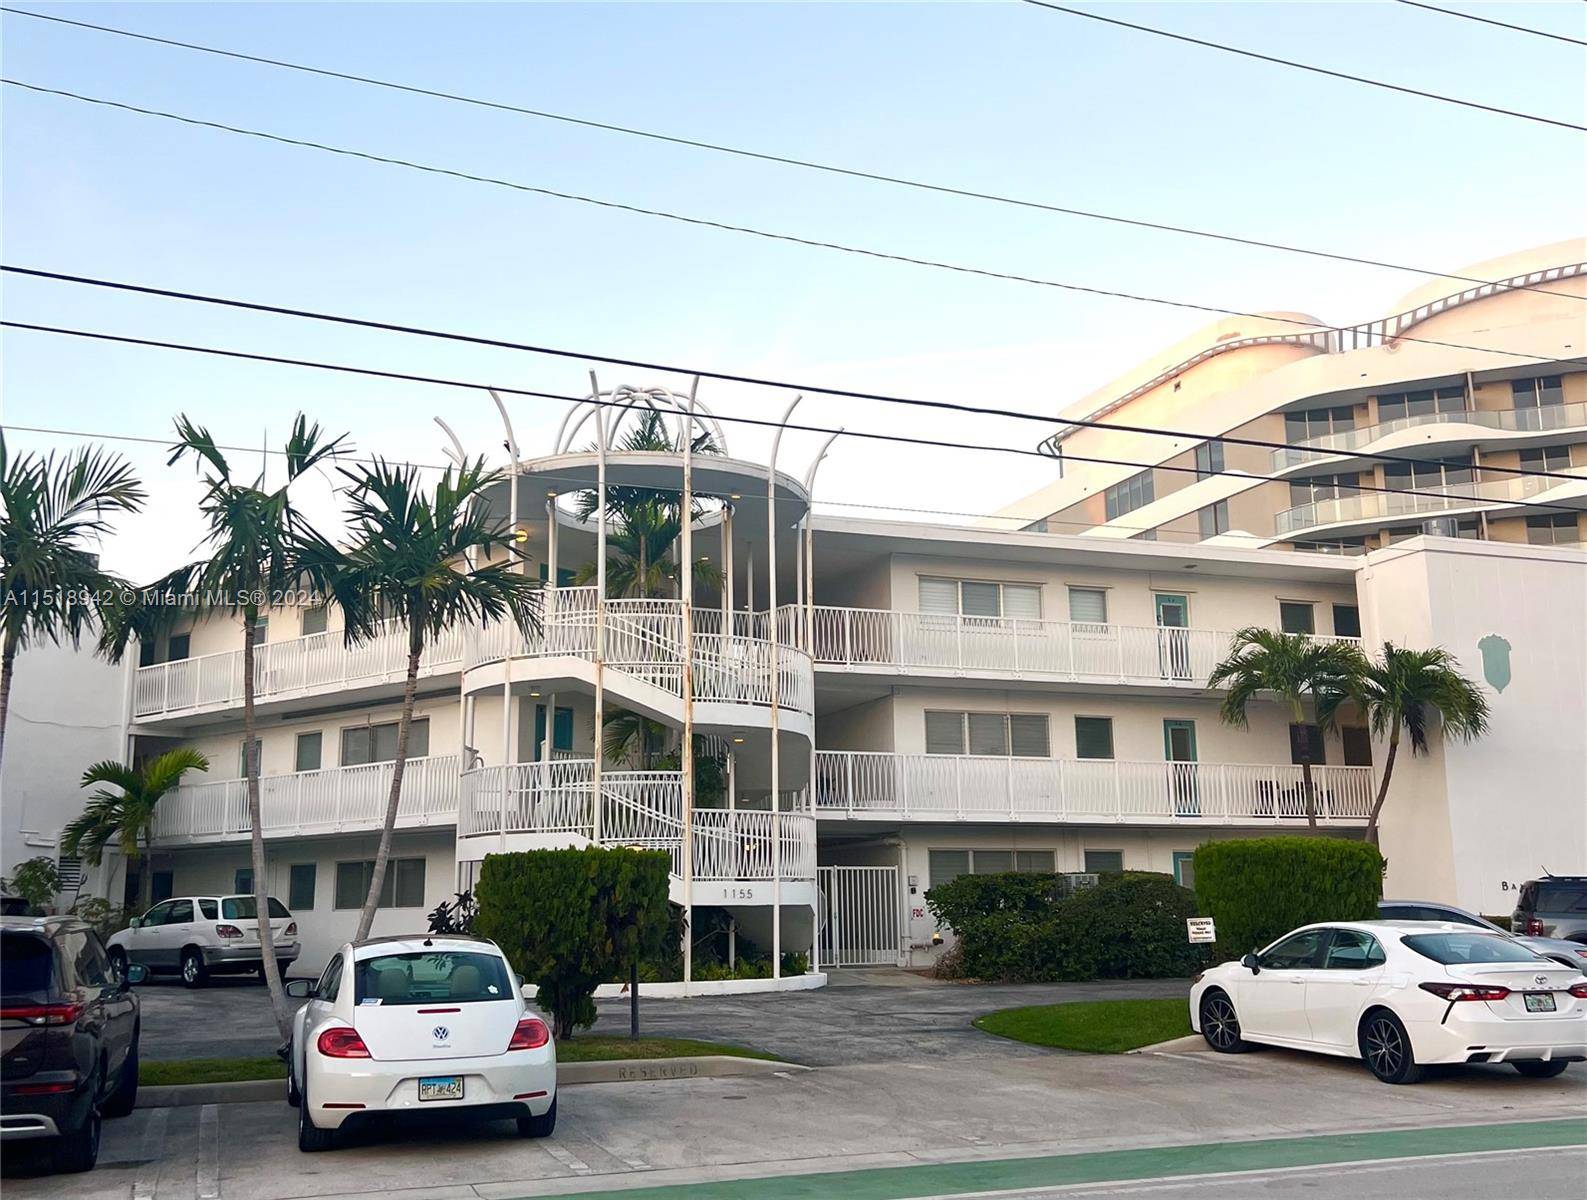 LOCATED IN BAY HARBOR ISLANDS MINUTES FROM BAL HARBOUR SHOPS.